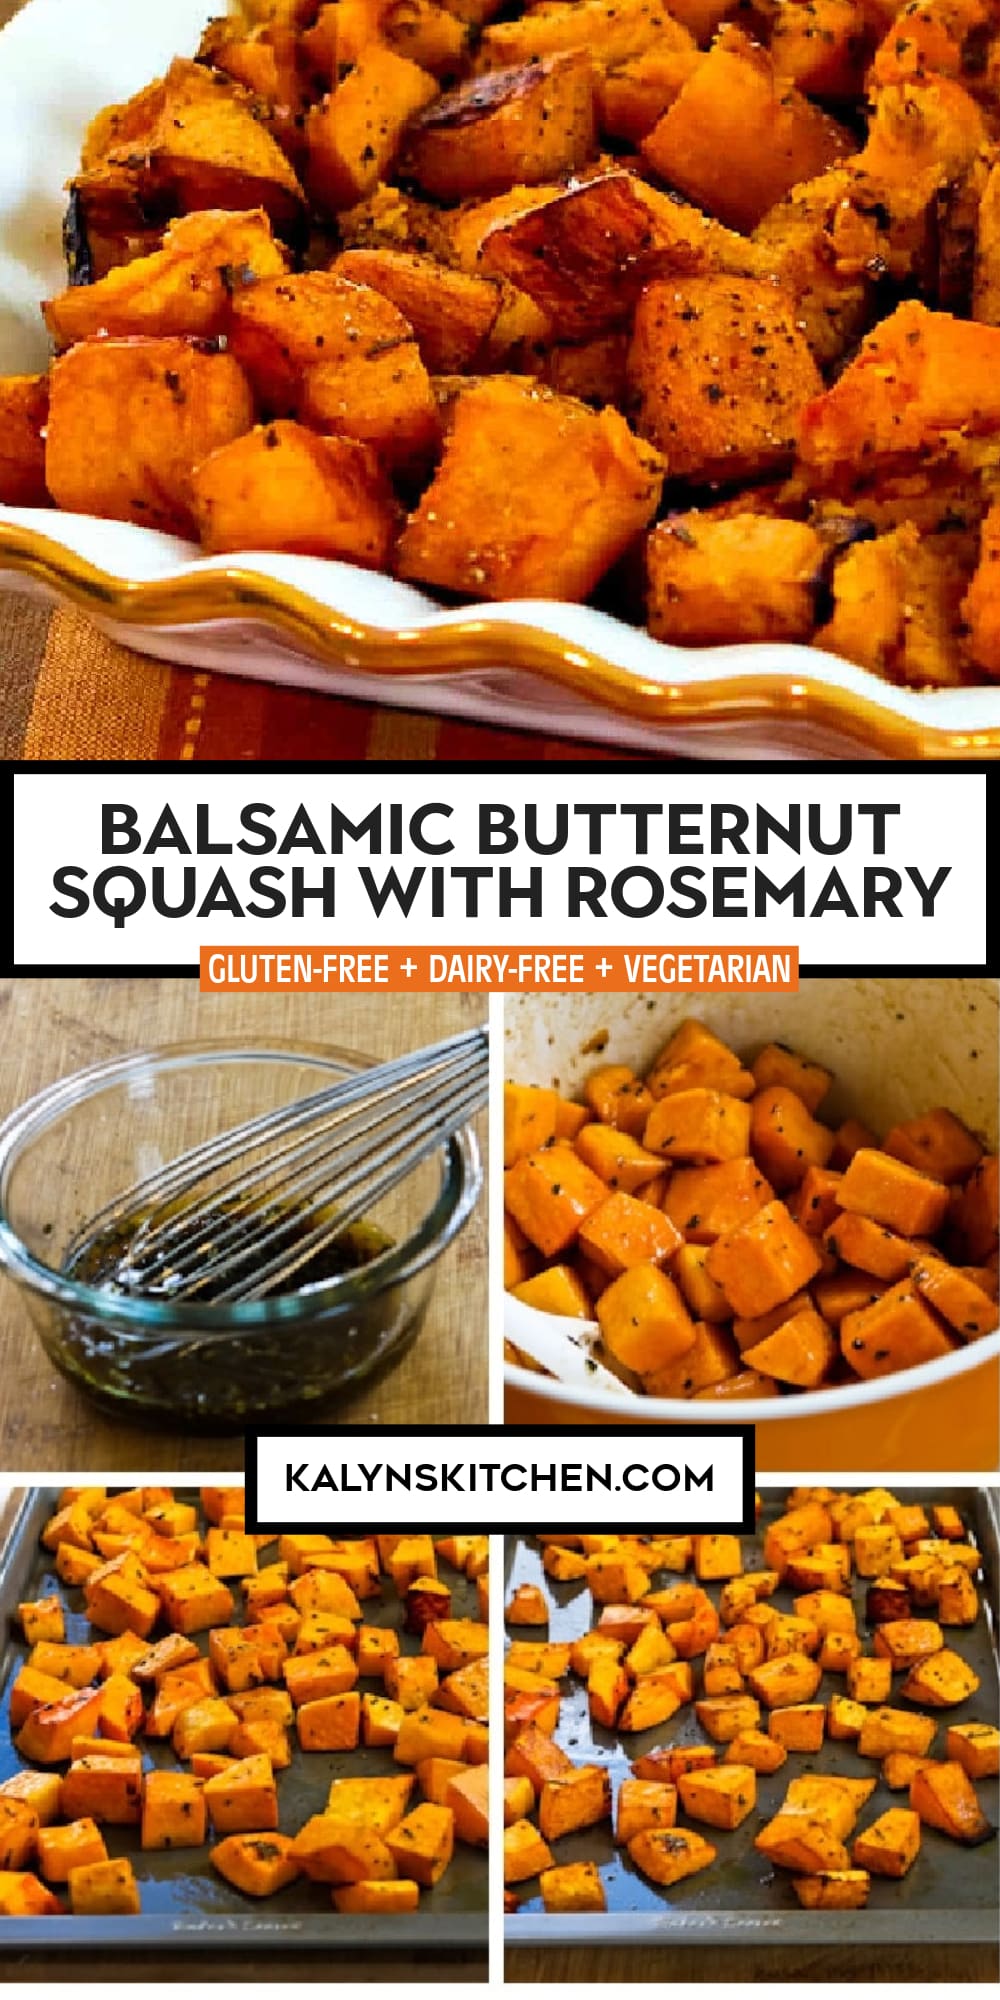 Pinterest image of Balsamic Butternut Squash with Rosemary